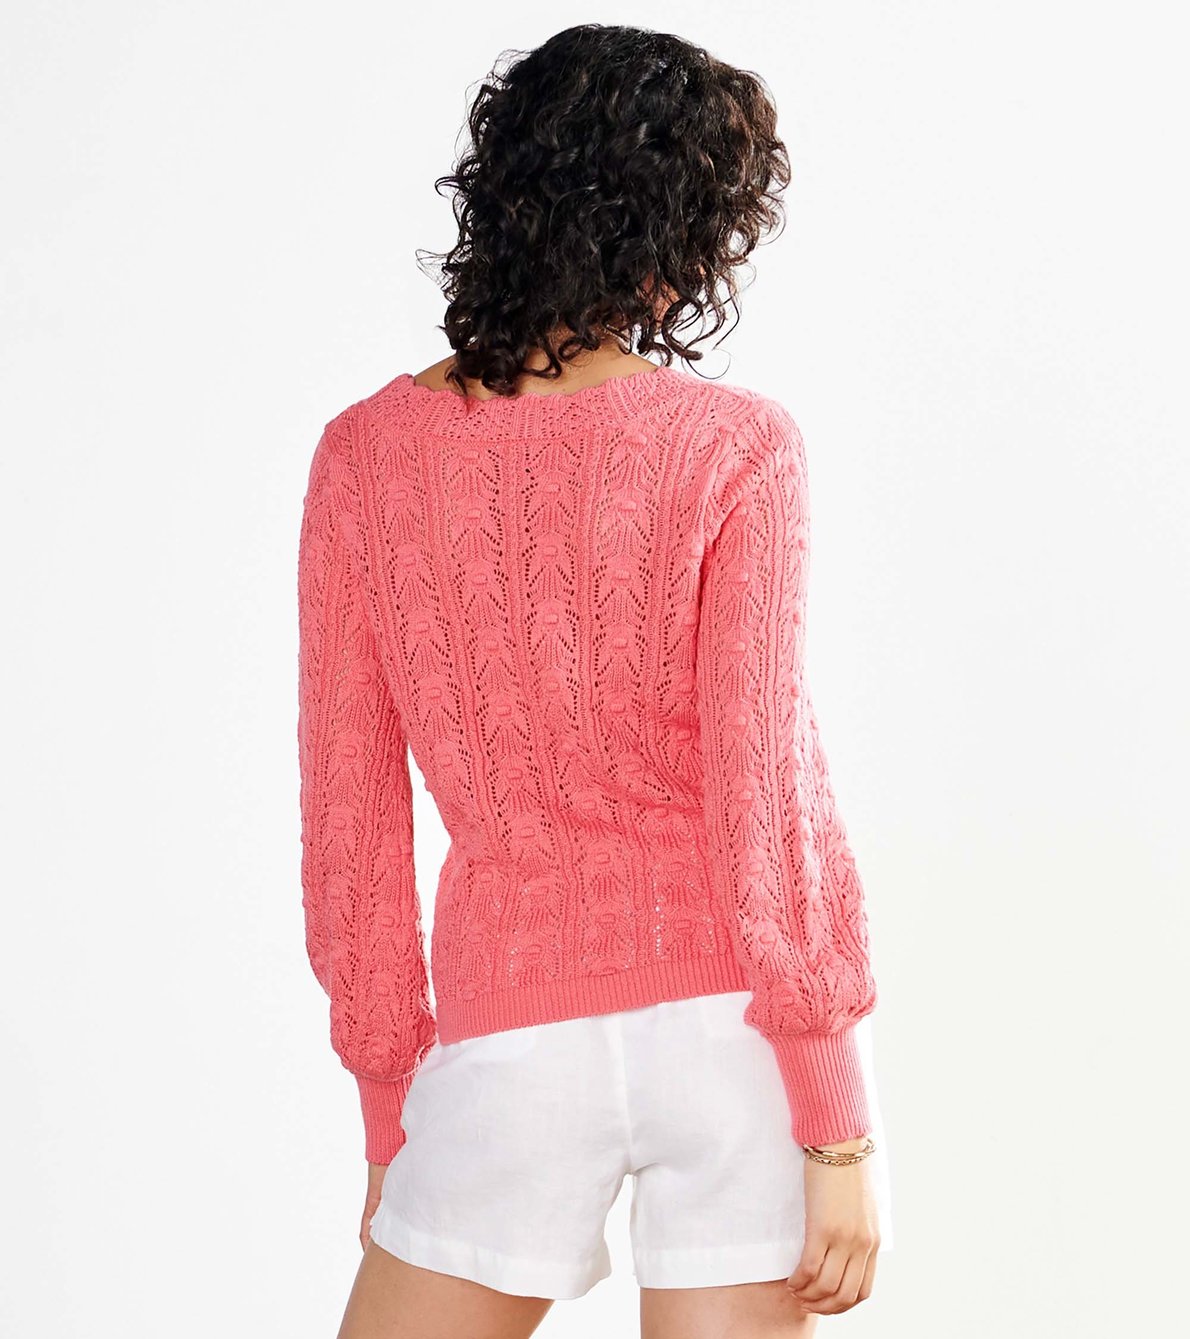 View larger image of Floral Pointelle Sweater - Coral Strawberry